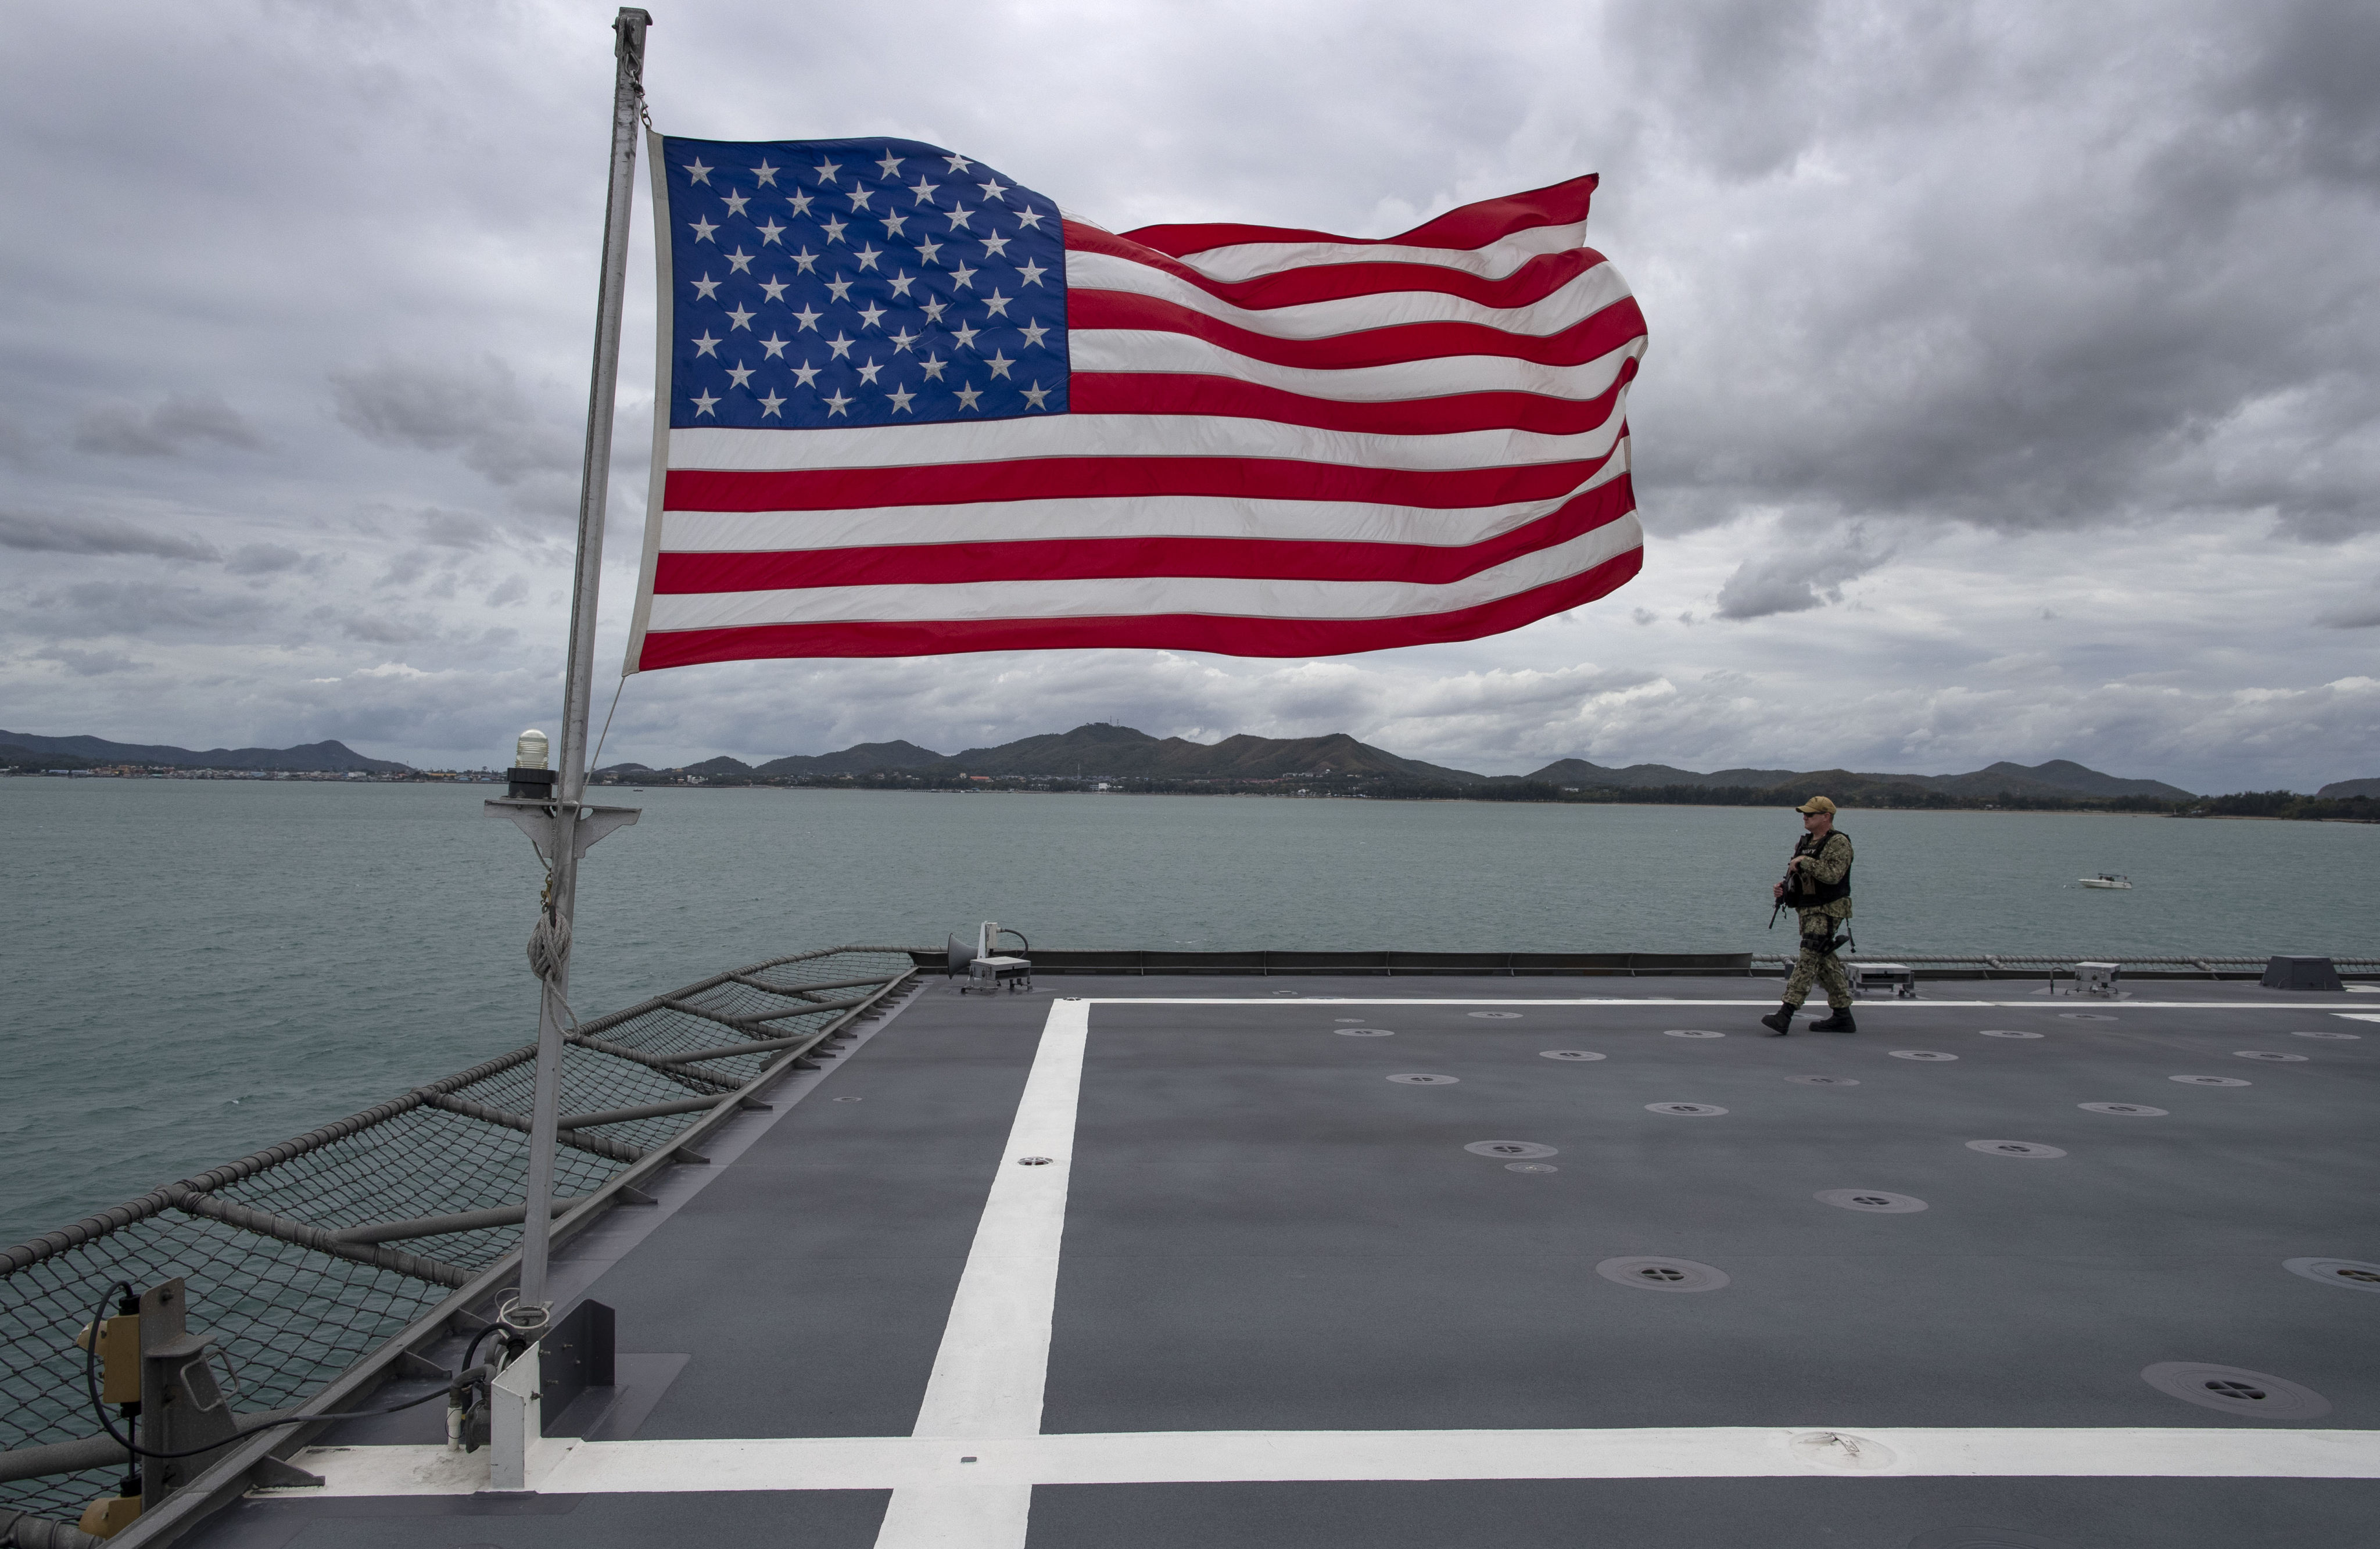 An officer patrols on board the USS Montgomery off Sattahip, Thailand in 2019. Photo: AP